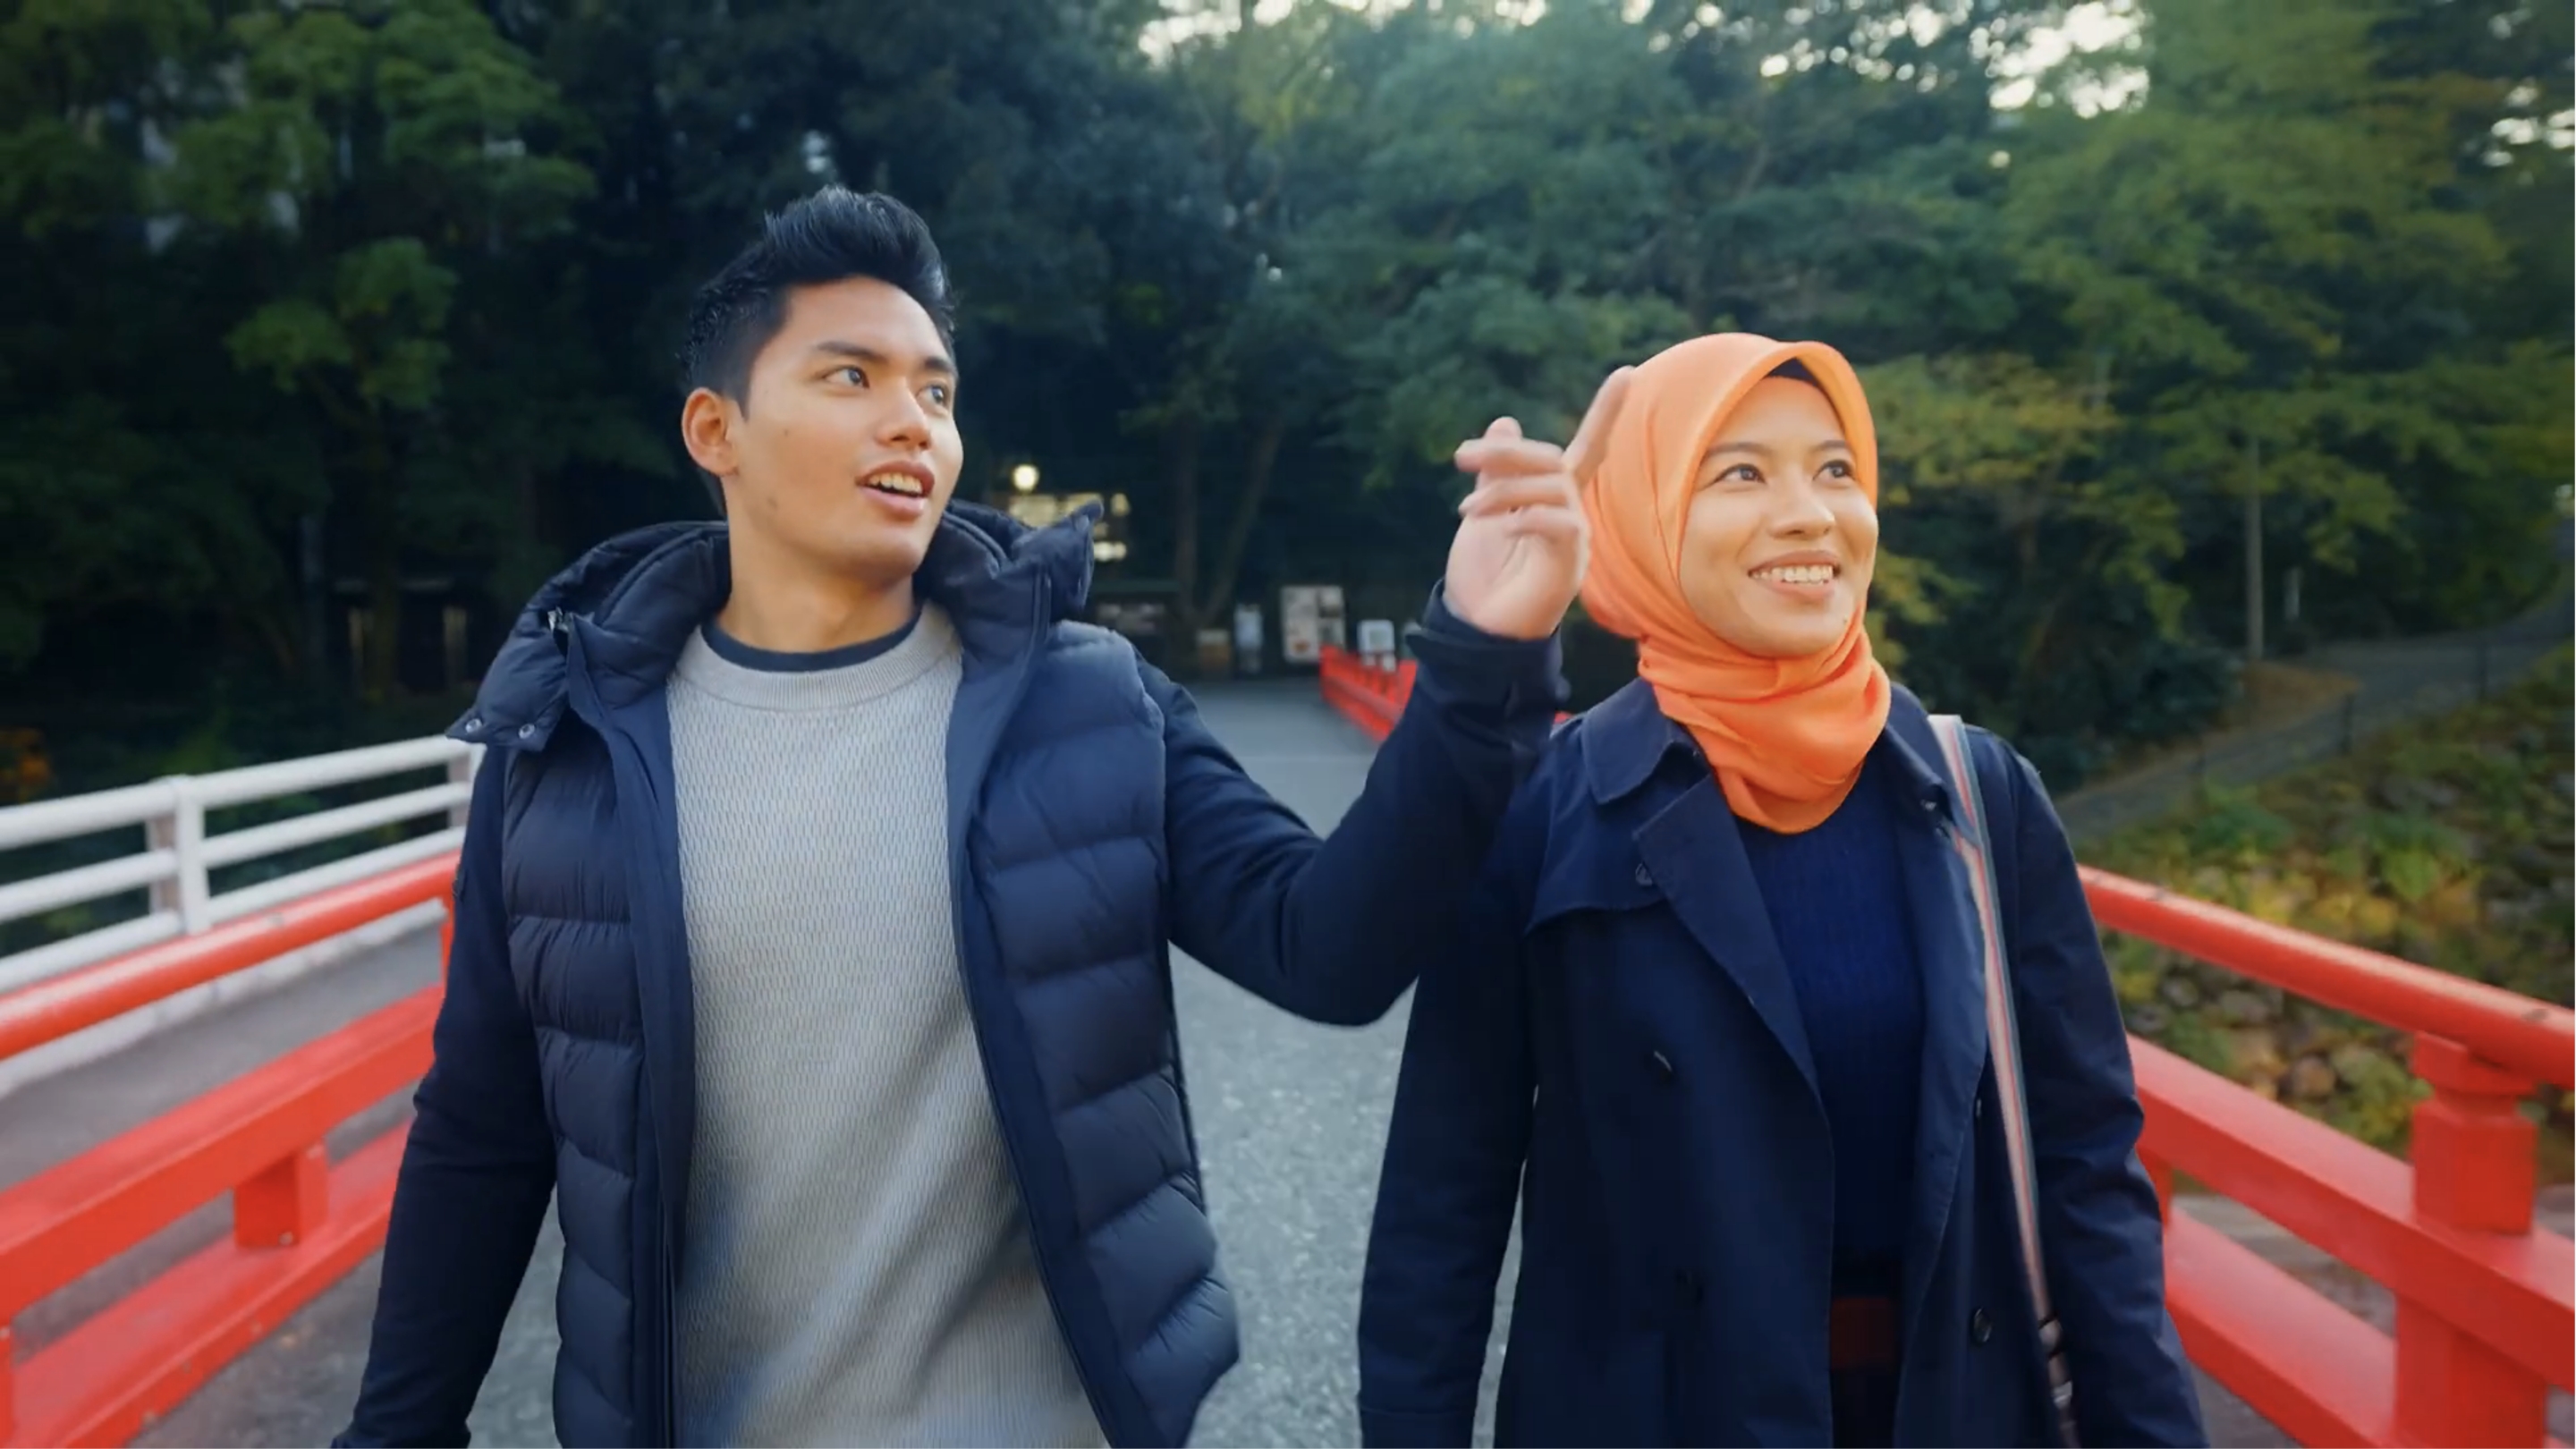 JAPAN Welcome Guide for Muslim Travelers. Muslim-friendly accommodations, facilities, Prayer rooms, activities, and travel tips.